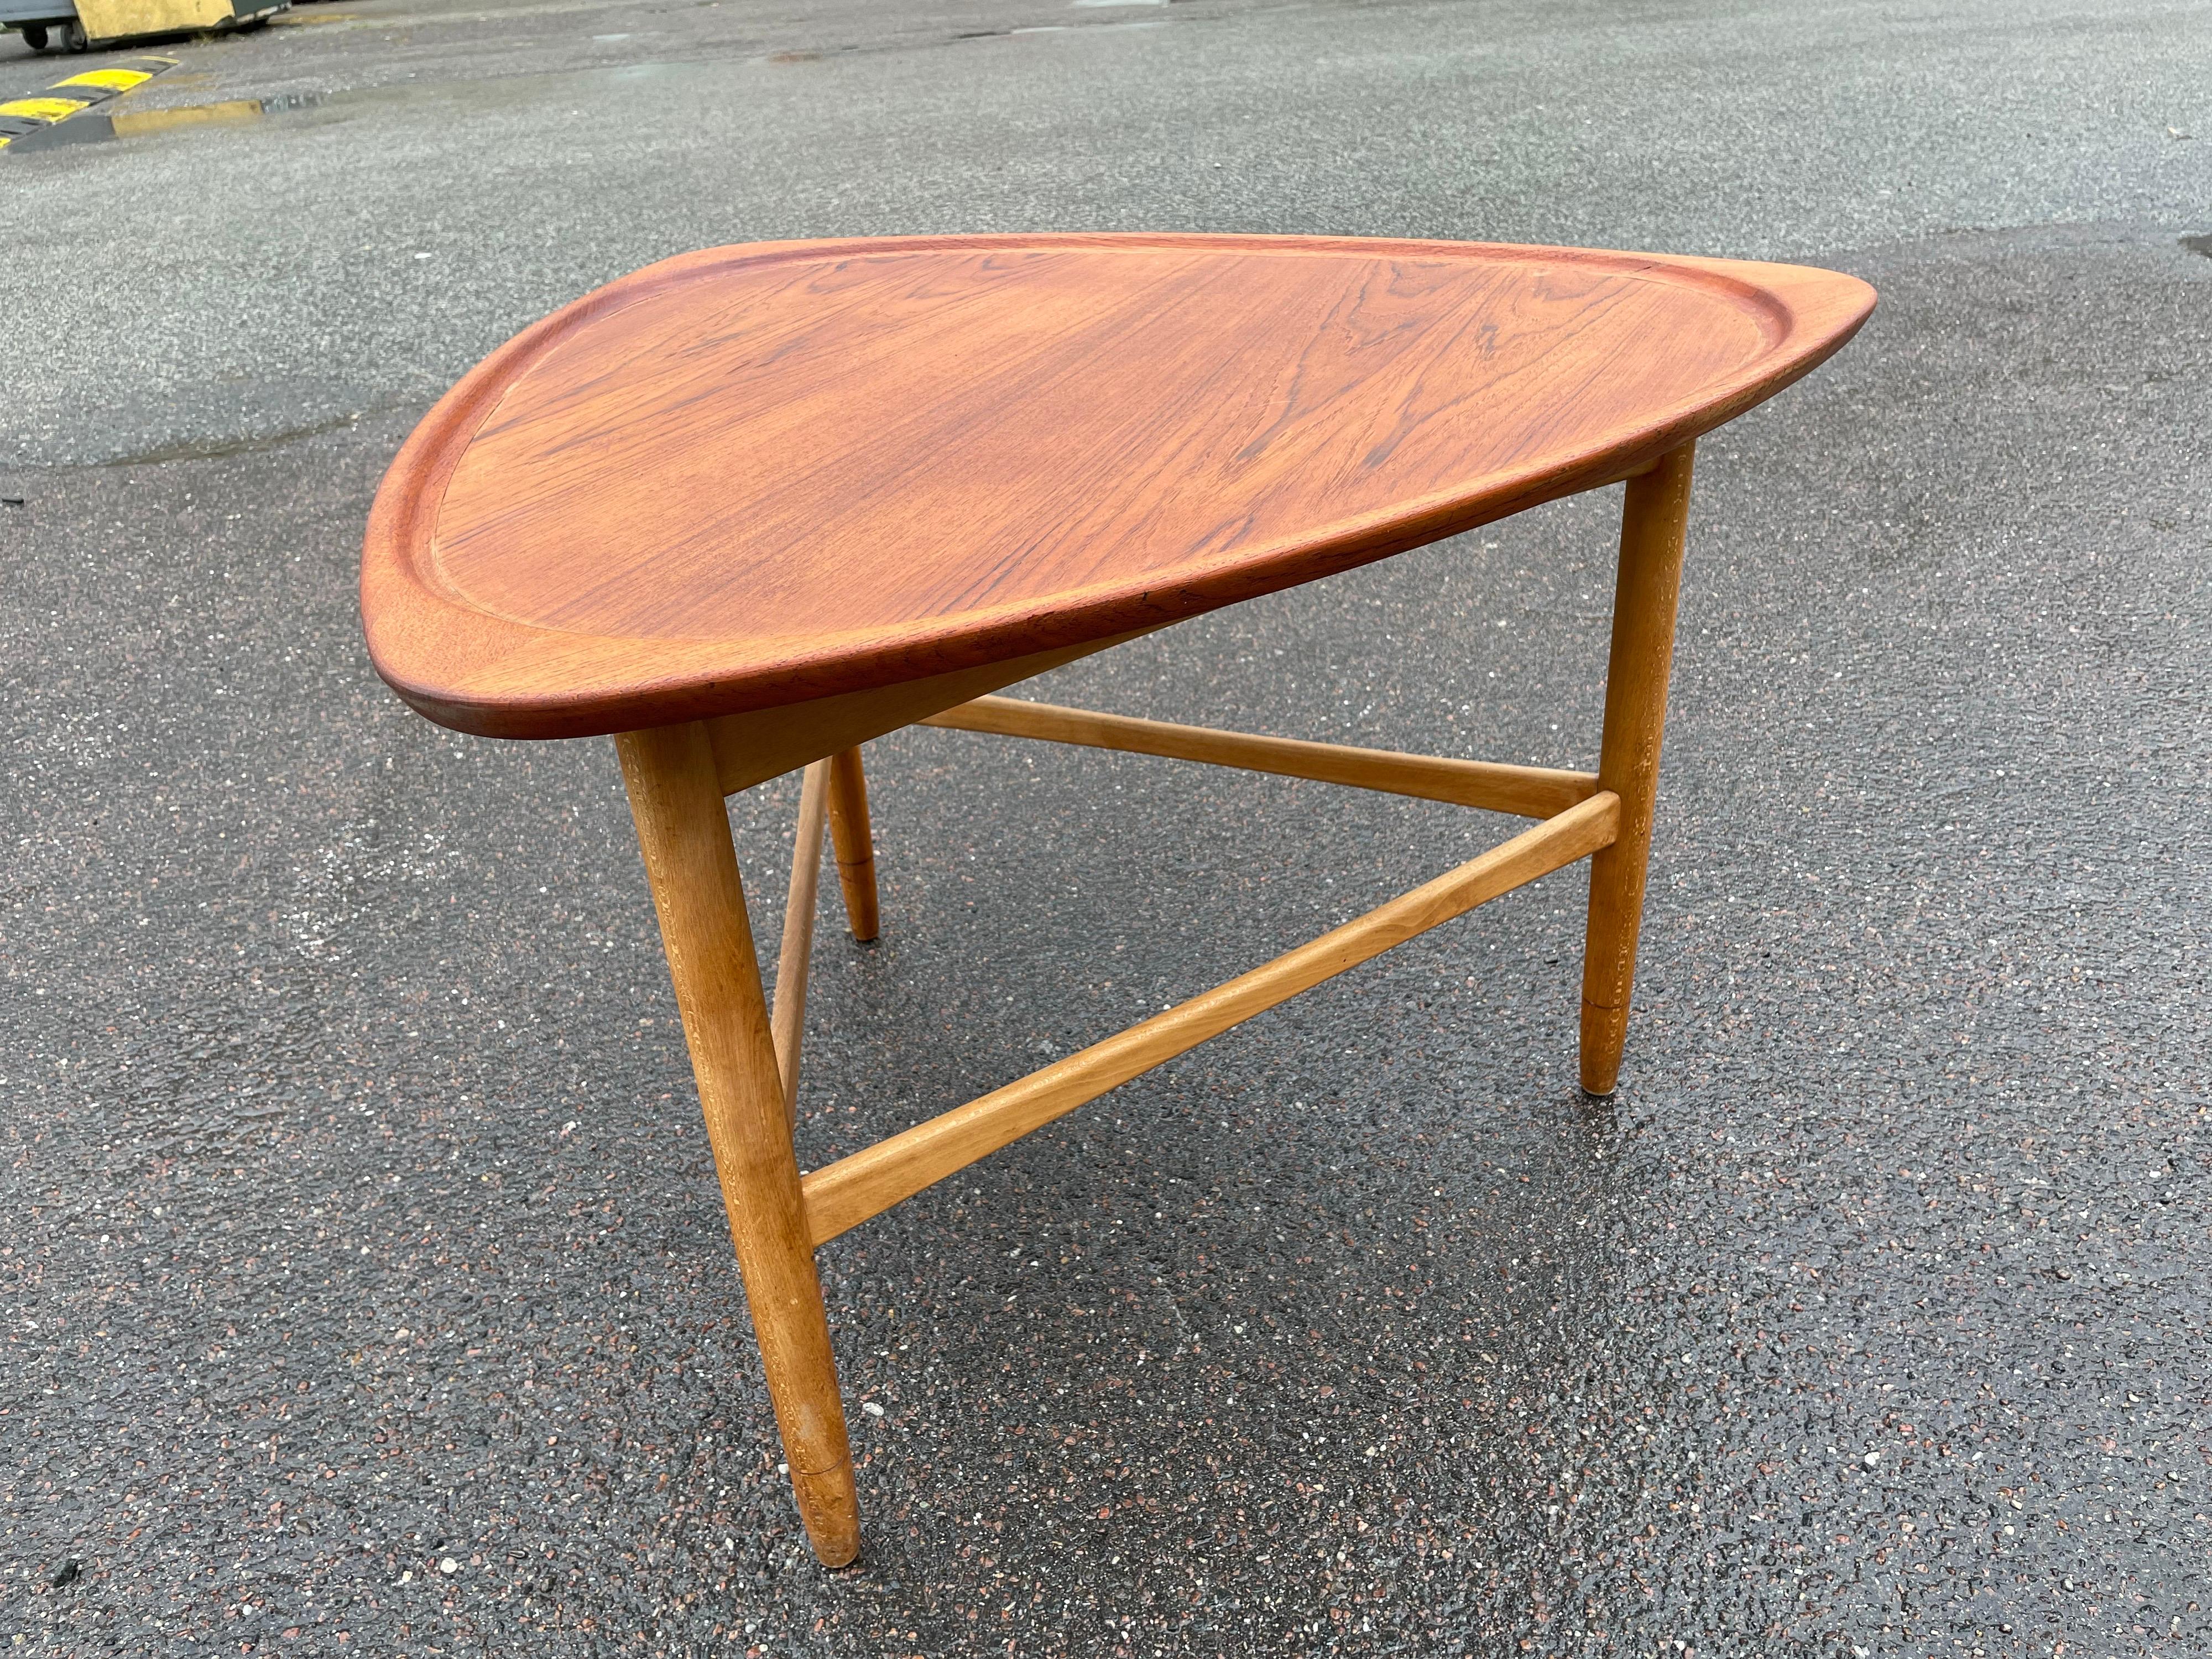 Stunning vintage modern coffee table / side table by Kurt Ostervig features unique sculpted oak legs.